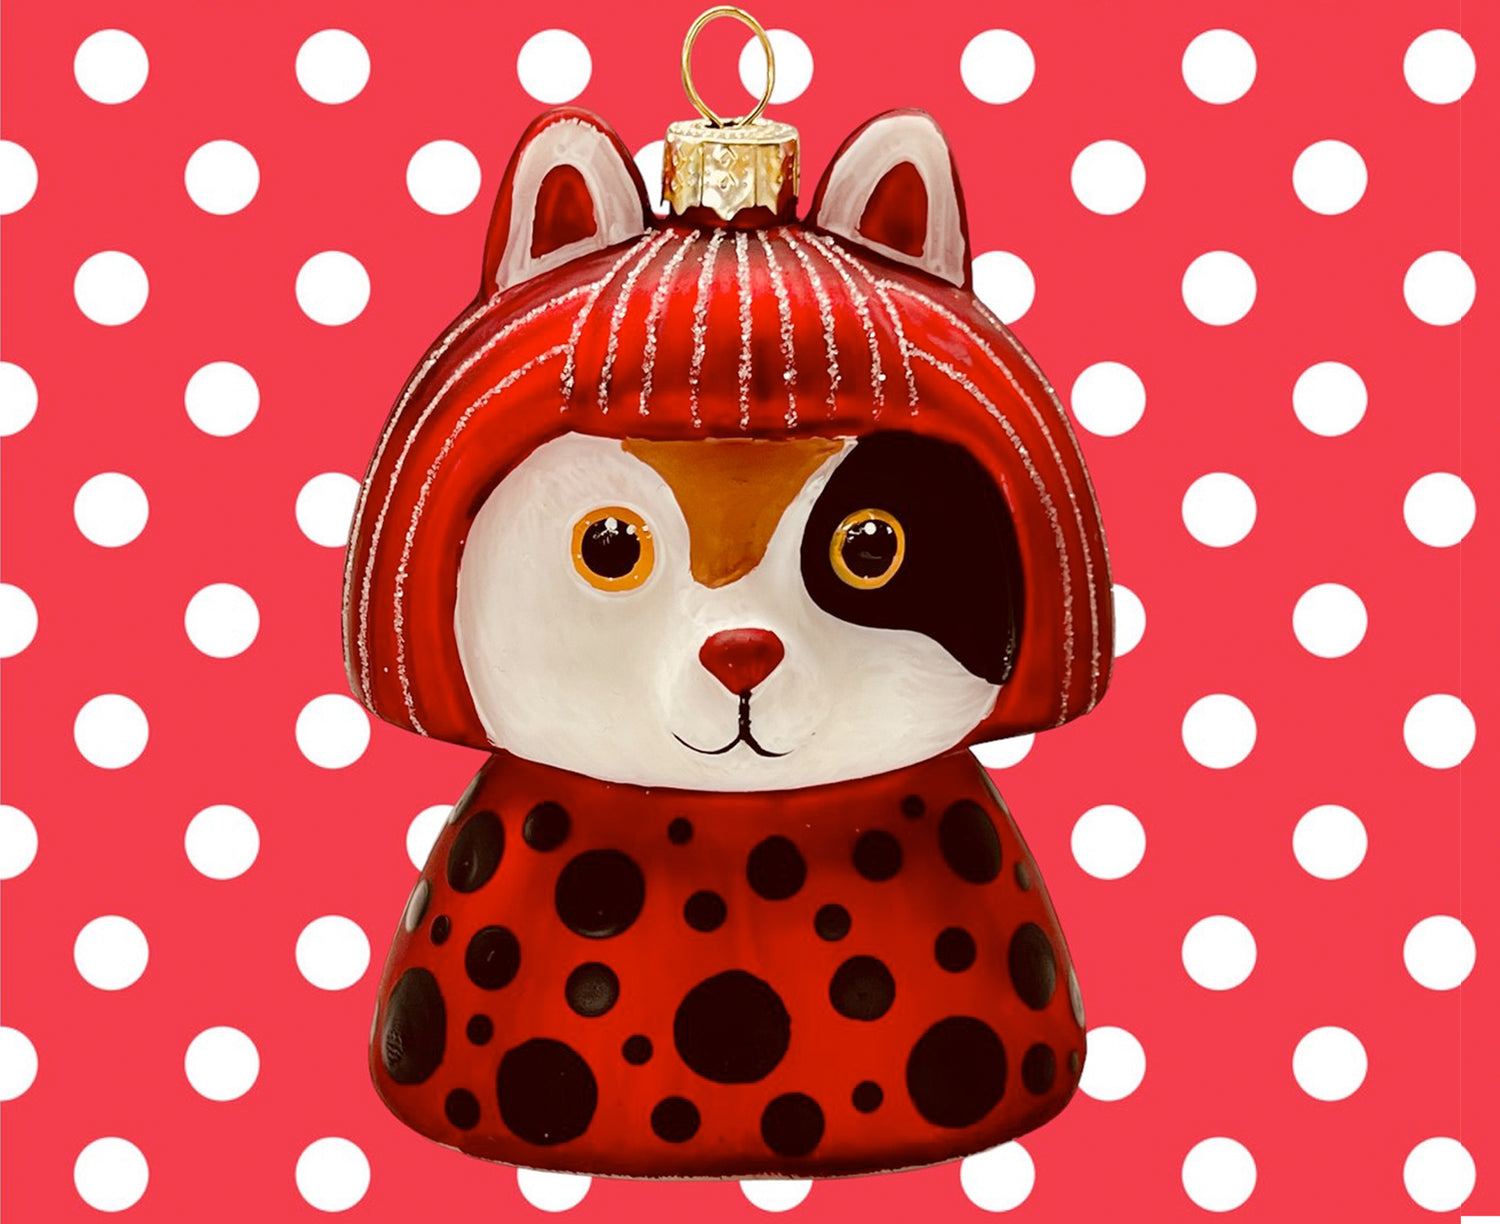 Kusameow Glass Ornament by Naked Decor